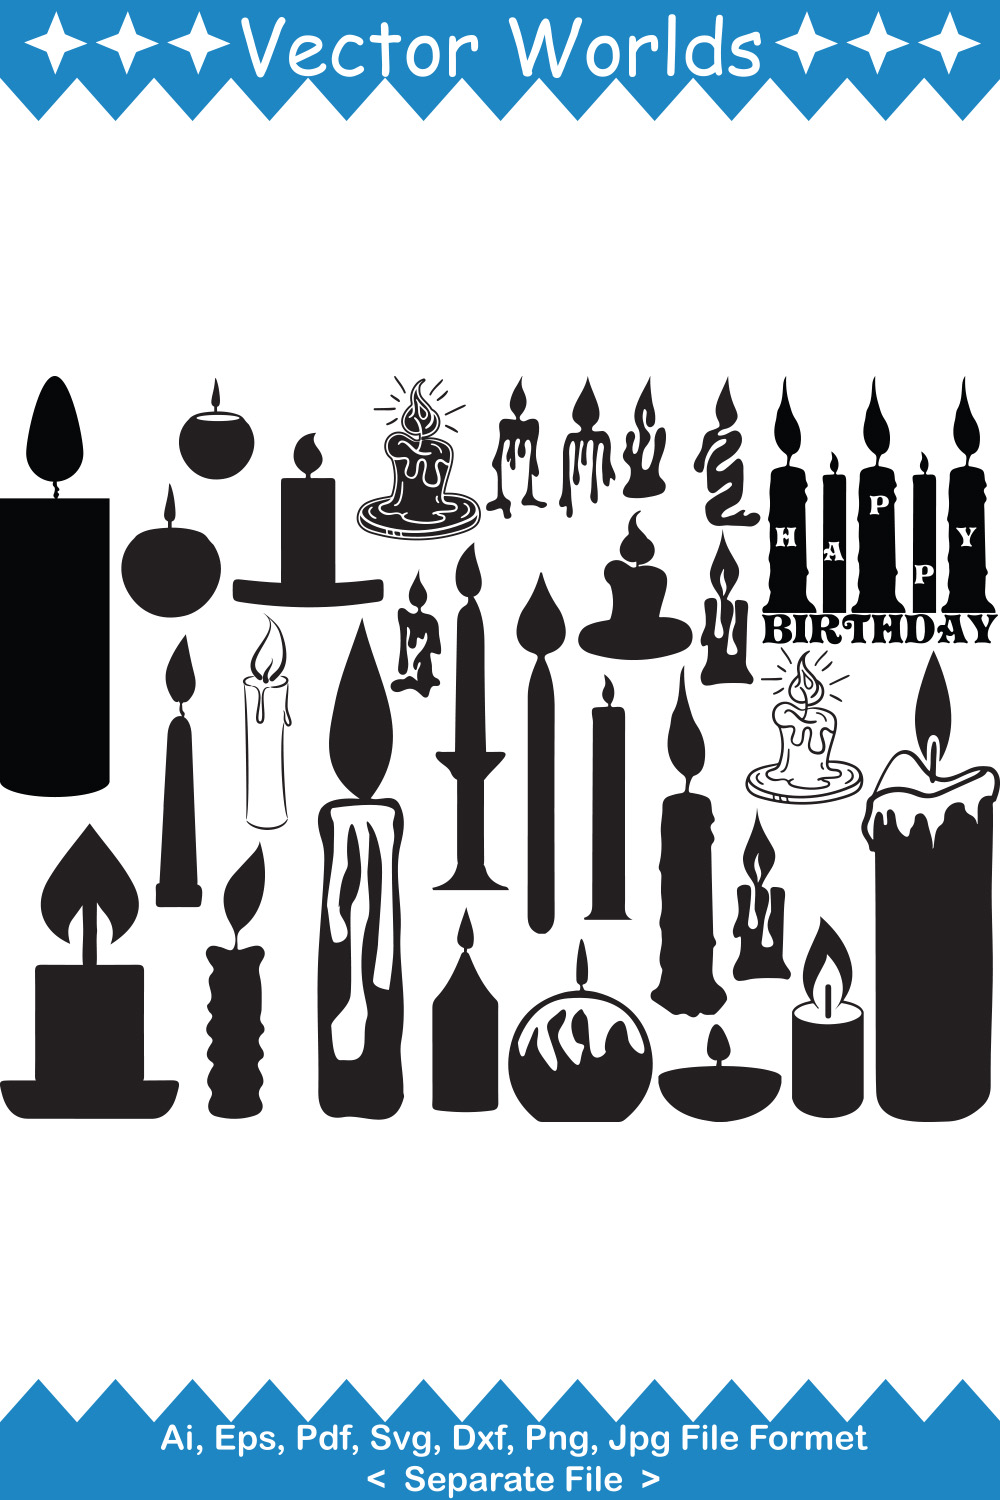 Collection of beautiful vector images of candles.